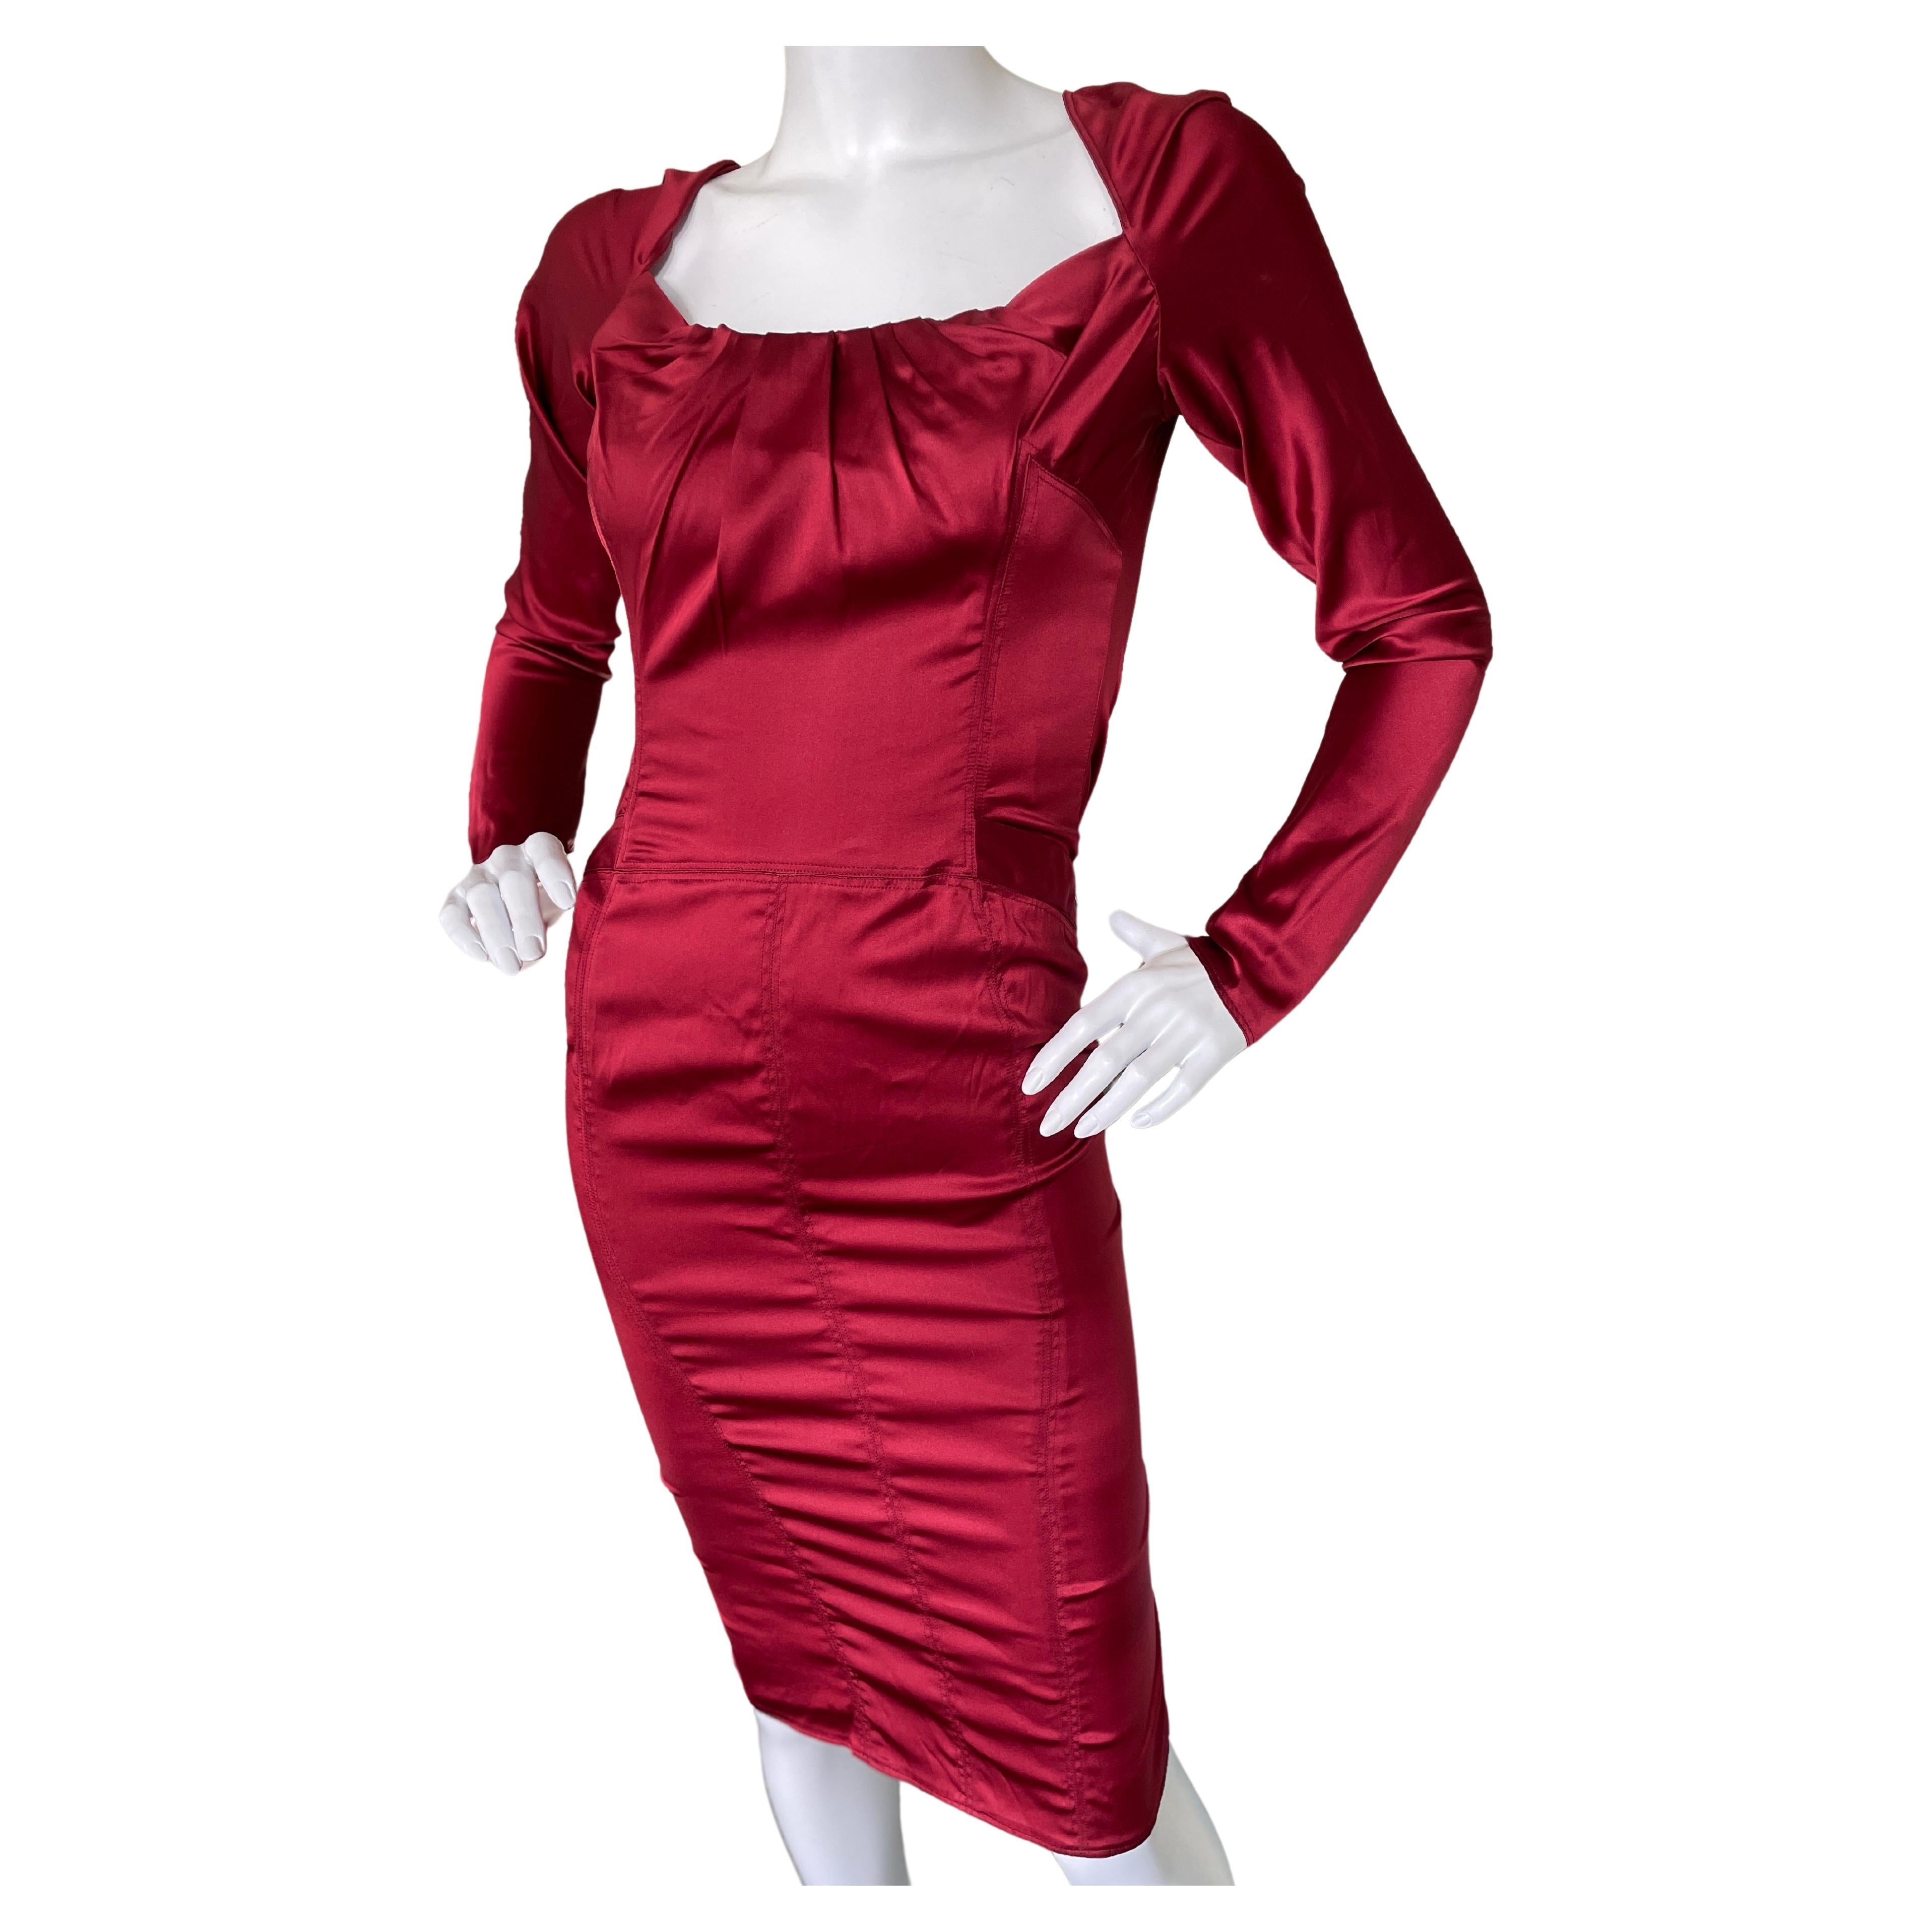 Gucci by Tom Ford Autumn 2003 Red Silk Cocktail Dress For Sale